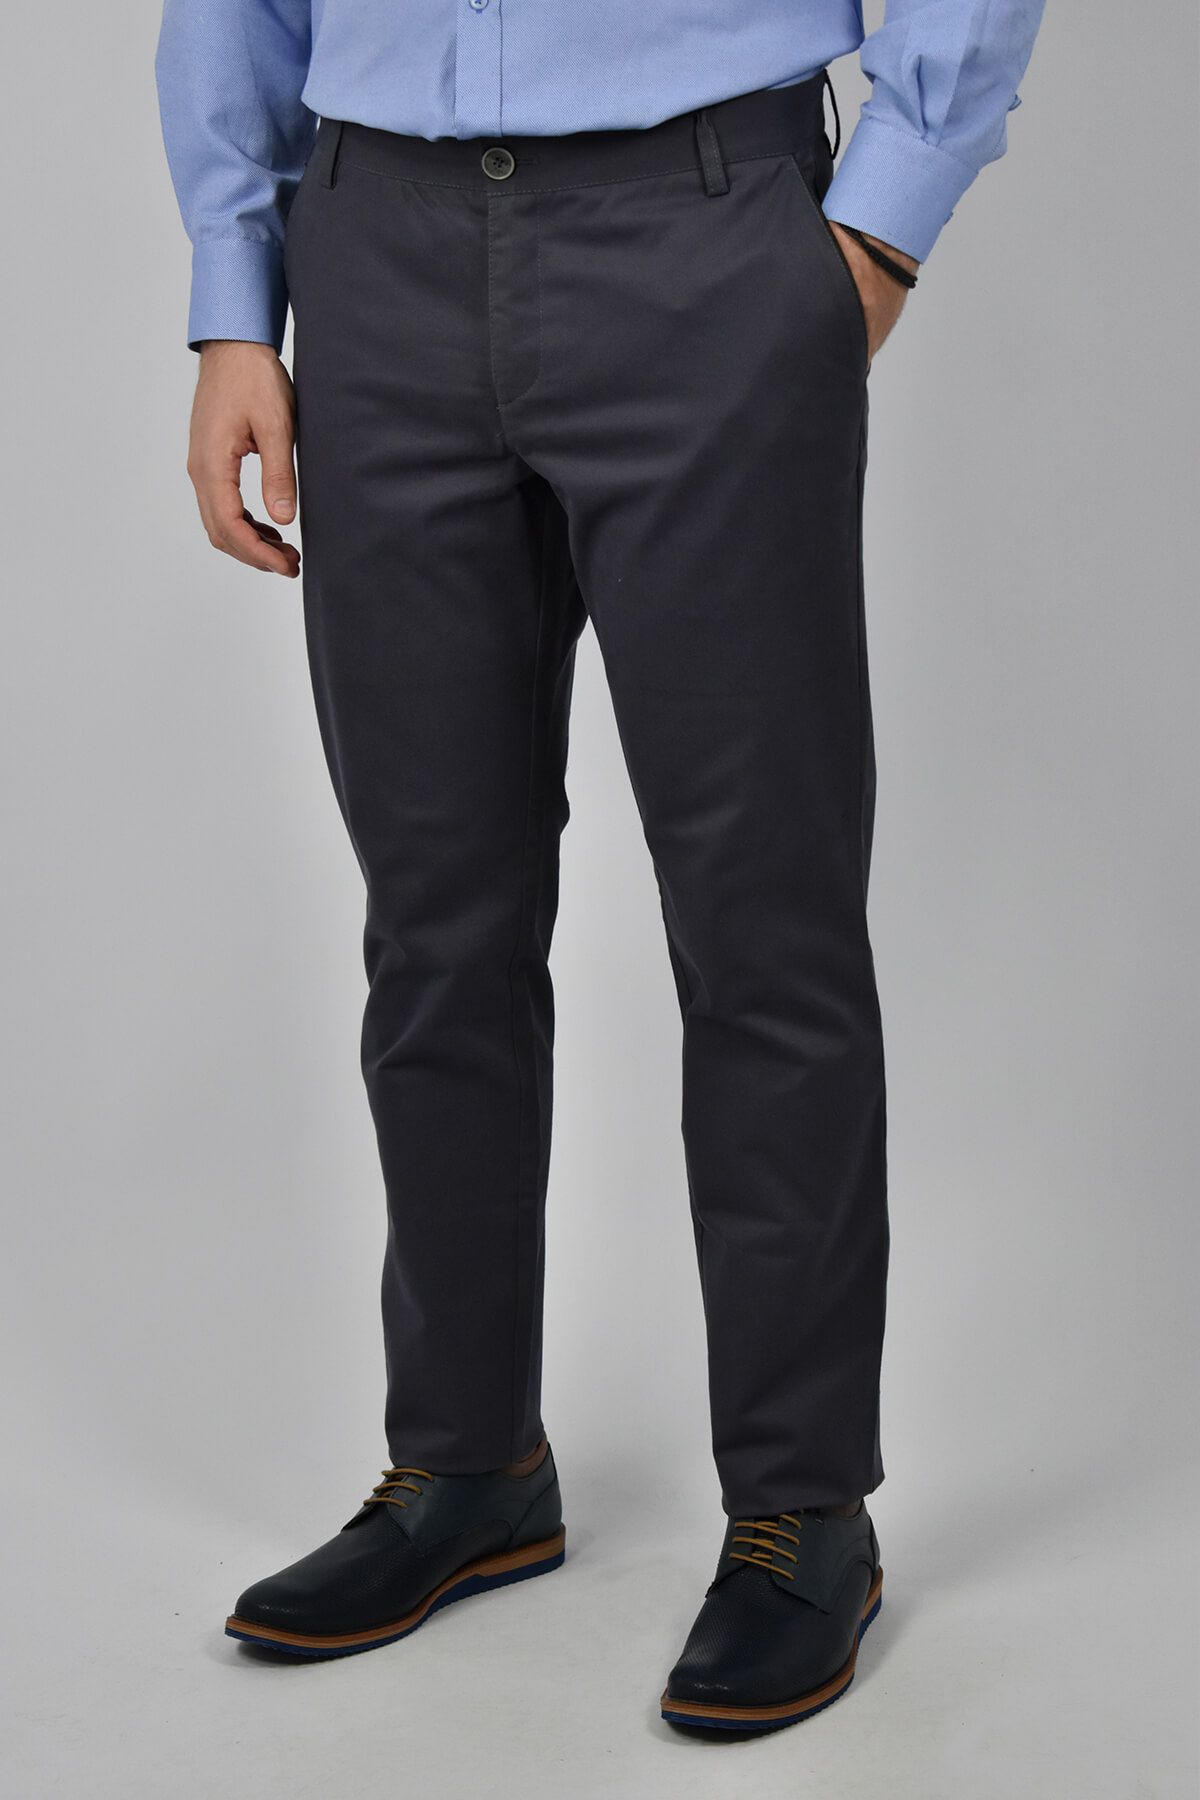 GioS Chinos Trousers